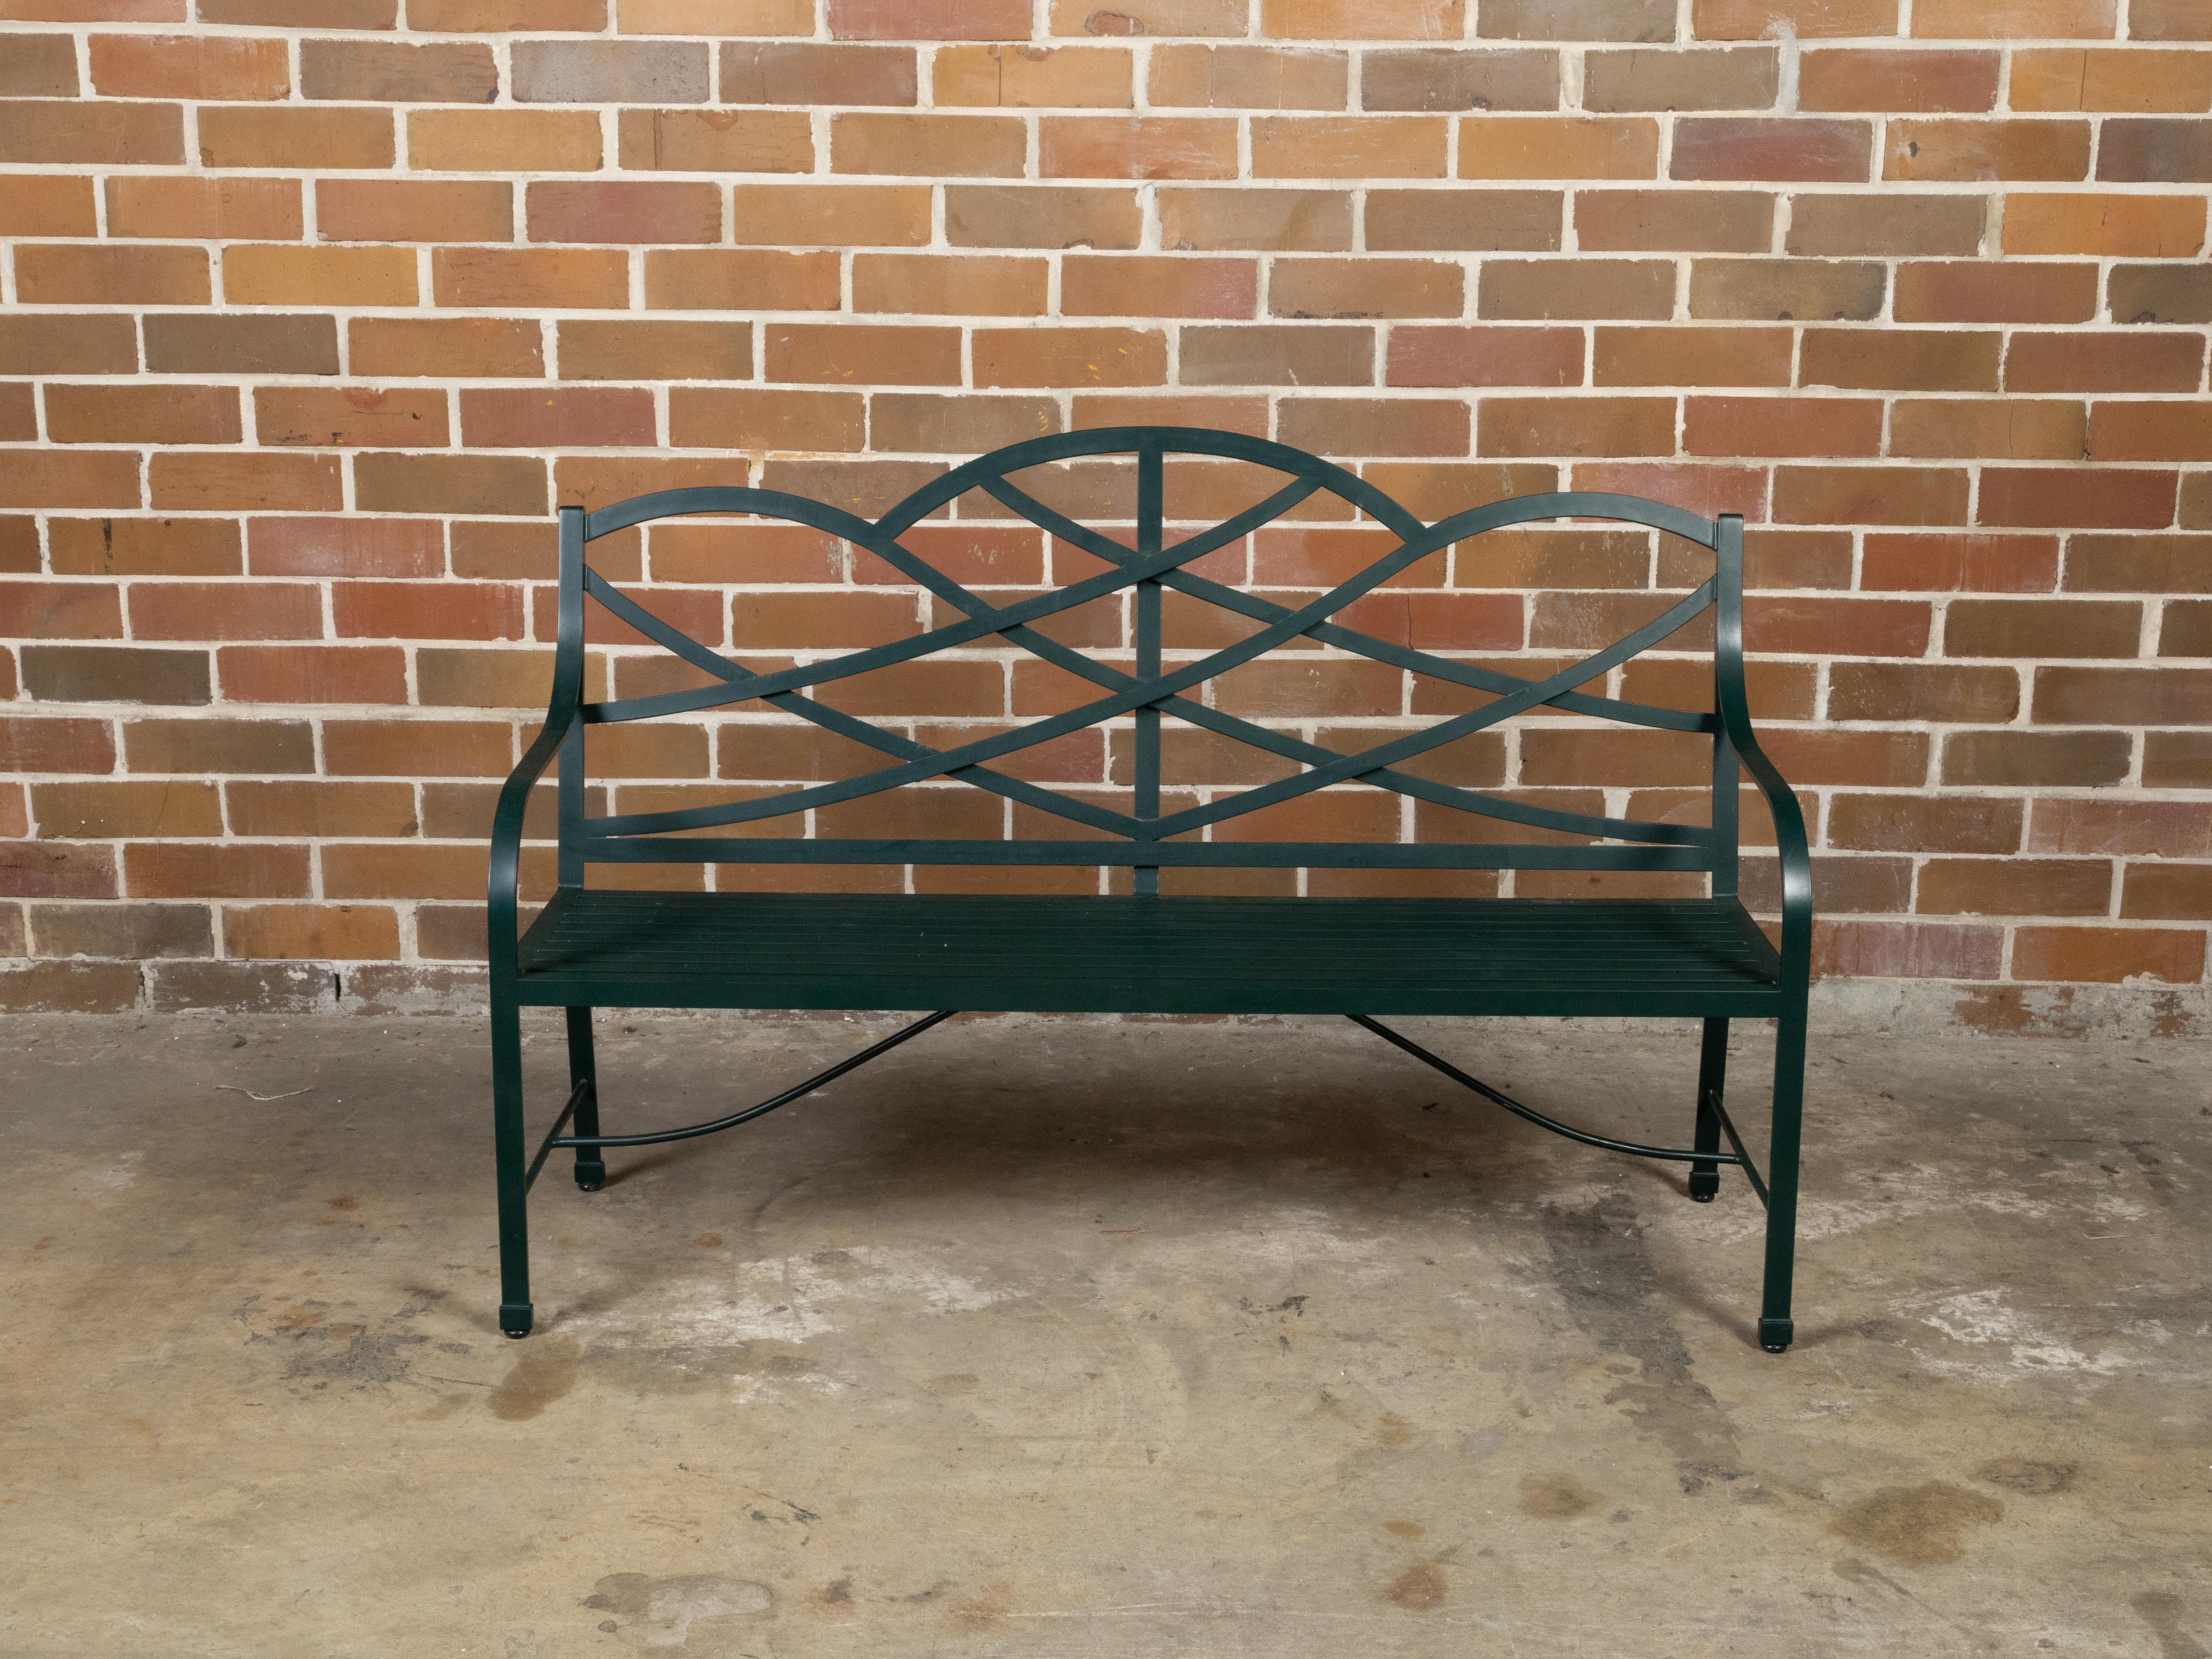 A vintage McKinnon and Harris dark green painted aluminum garden bench from the late 20th century with latticed back, slatted seat and arching top. Made in the USA during the last part of the 20th century, this McKinnon and Harris bench captures our